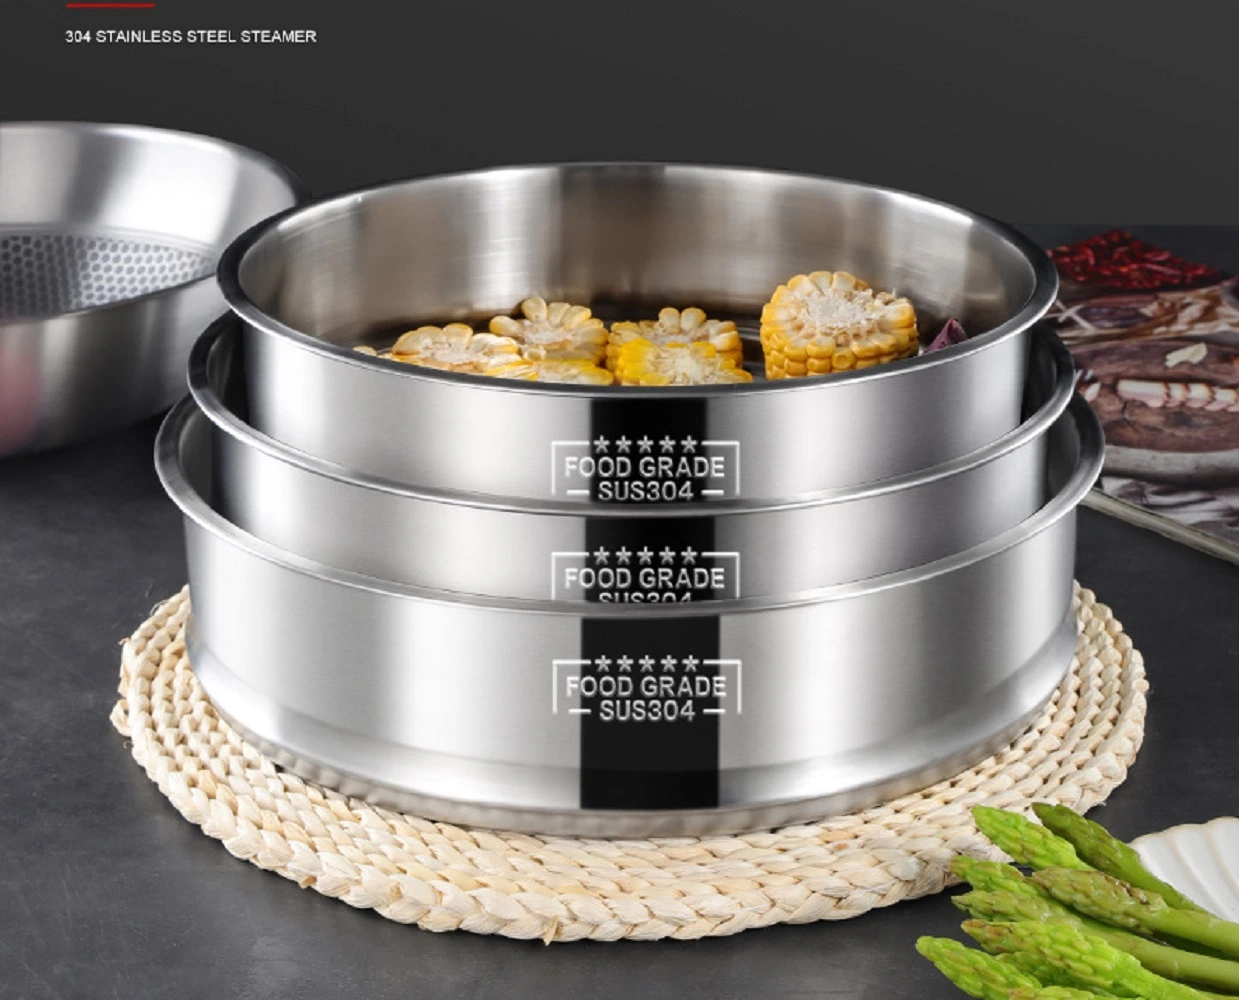 Steamer Cookware Stainless Steel Household Thickened and Deepened Steaming Grid Vegetables Fruits Drain Basin Steaming Basket Esg17589